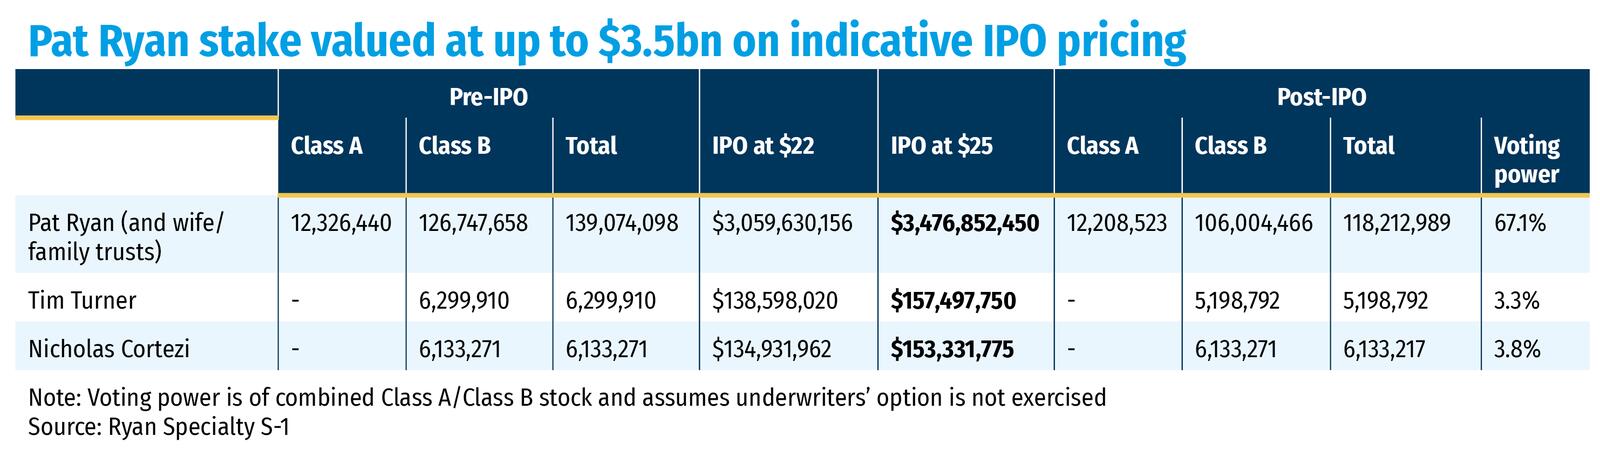 Pat Ryan stake valued at up to $3.5bn on indicative IPO pricing